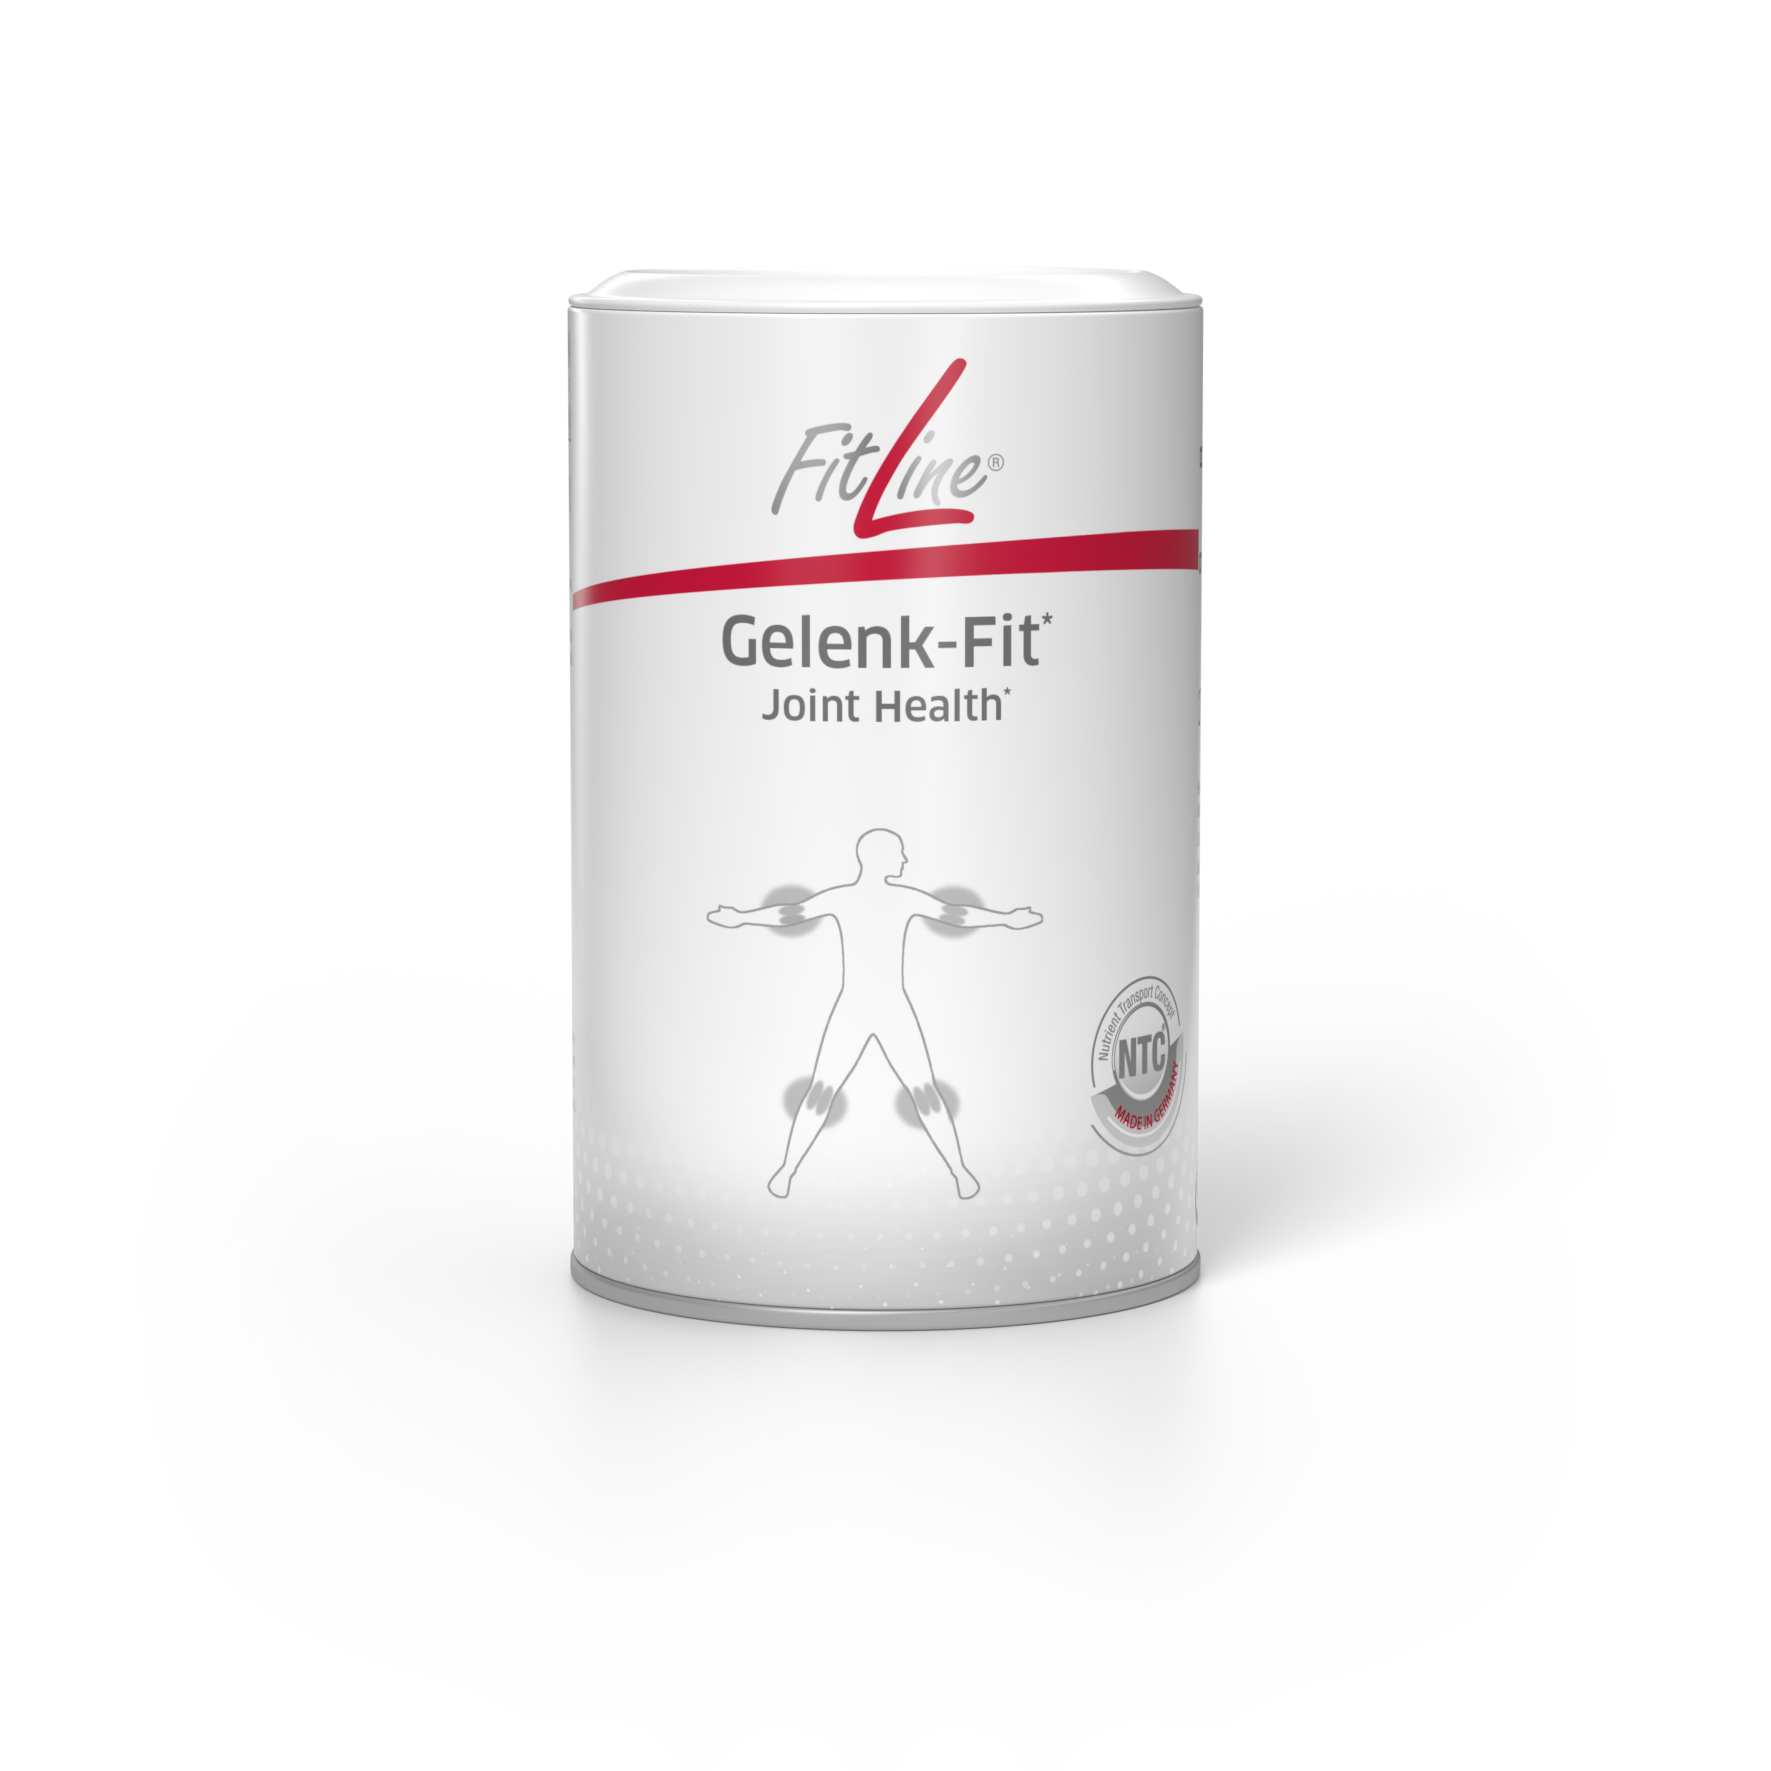 Fitline Gelenk-Fit Joint Health